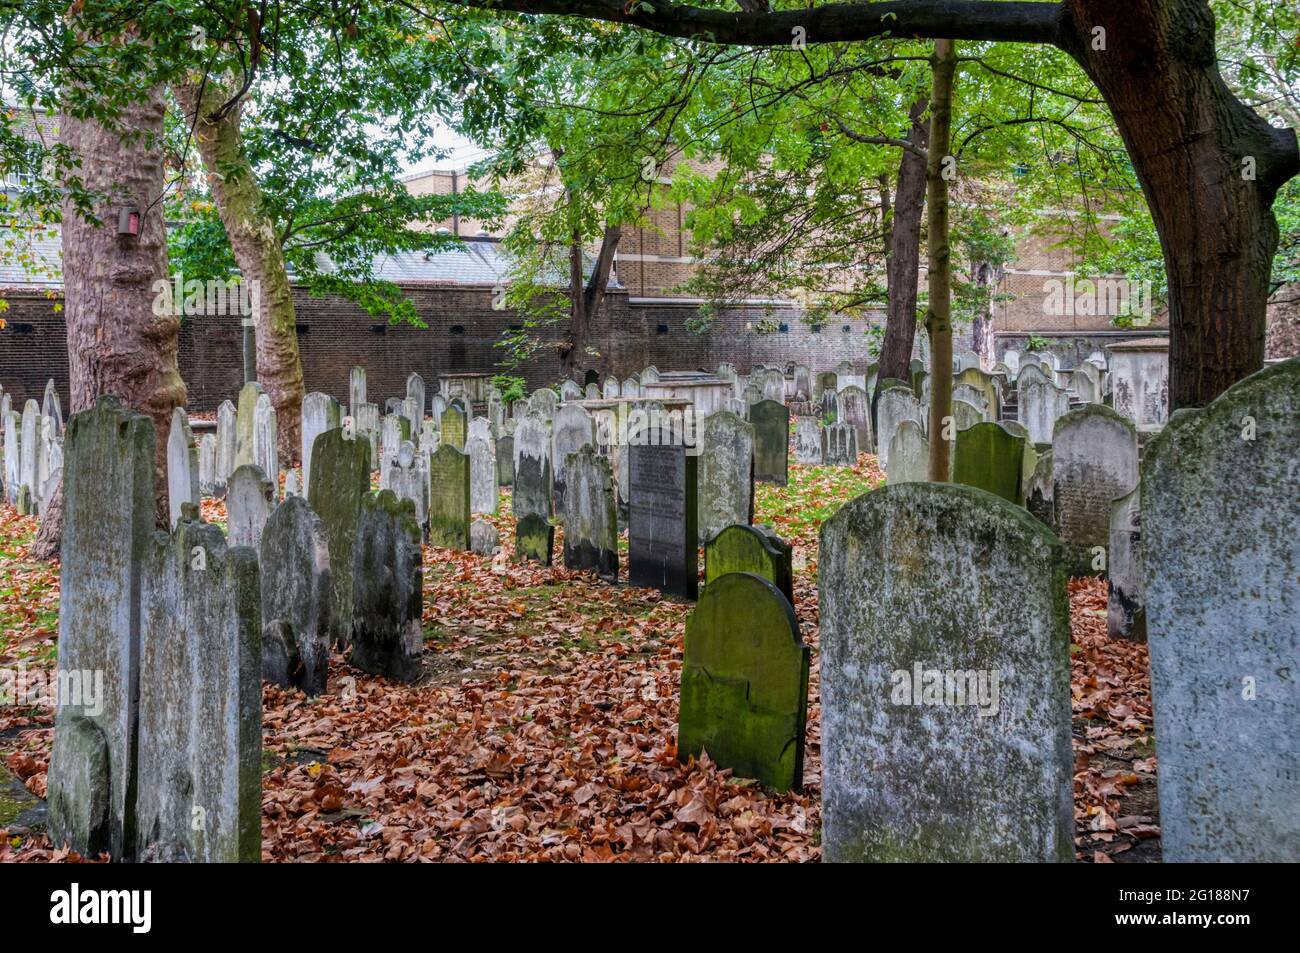 The former burial ground of Bunhill Fields in Islington, North London, is listed Grade I on the Register of Historic Parks and Gardens. Stock Photo